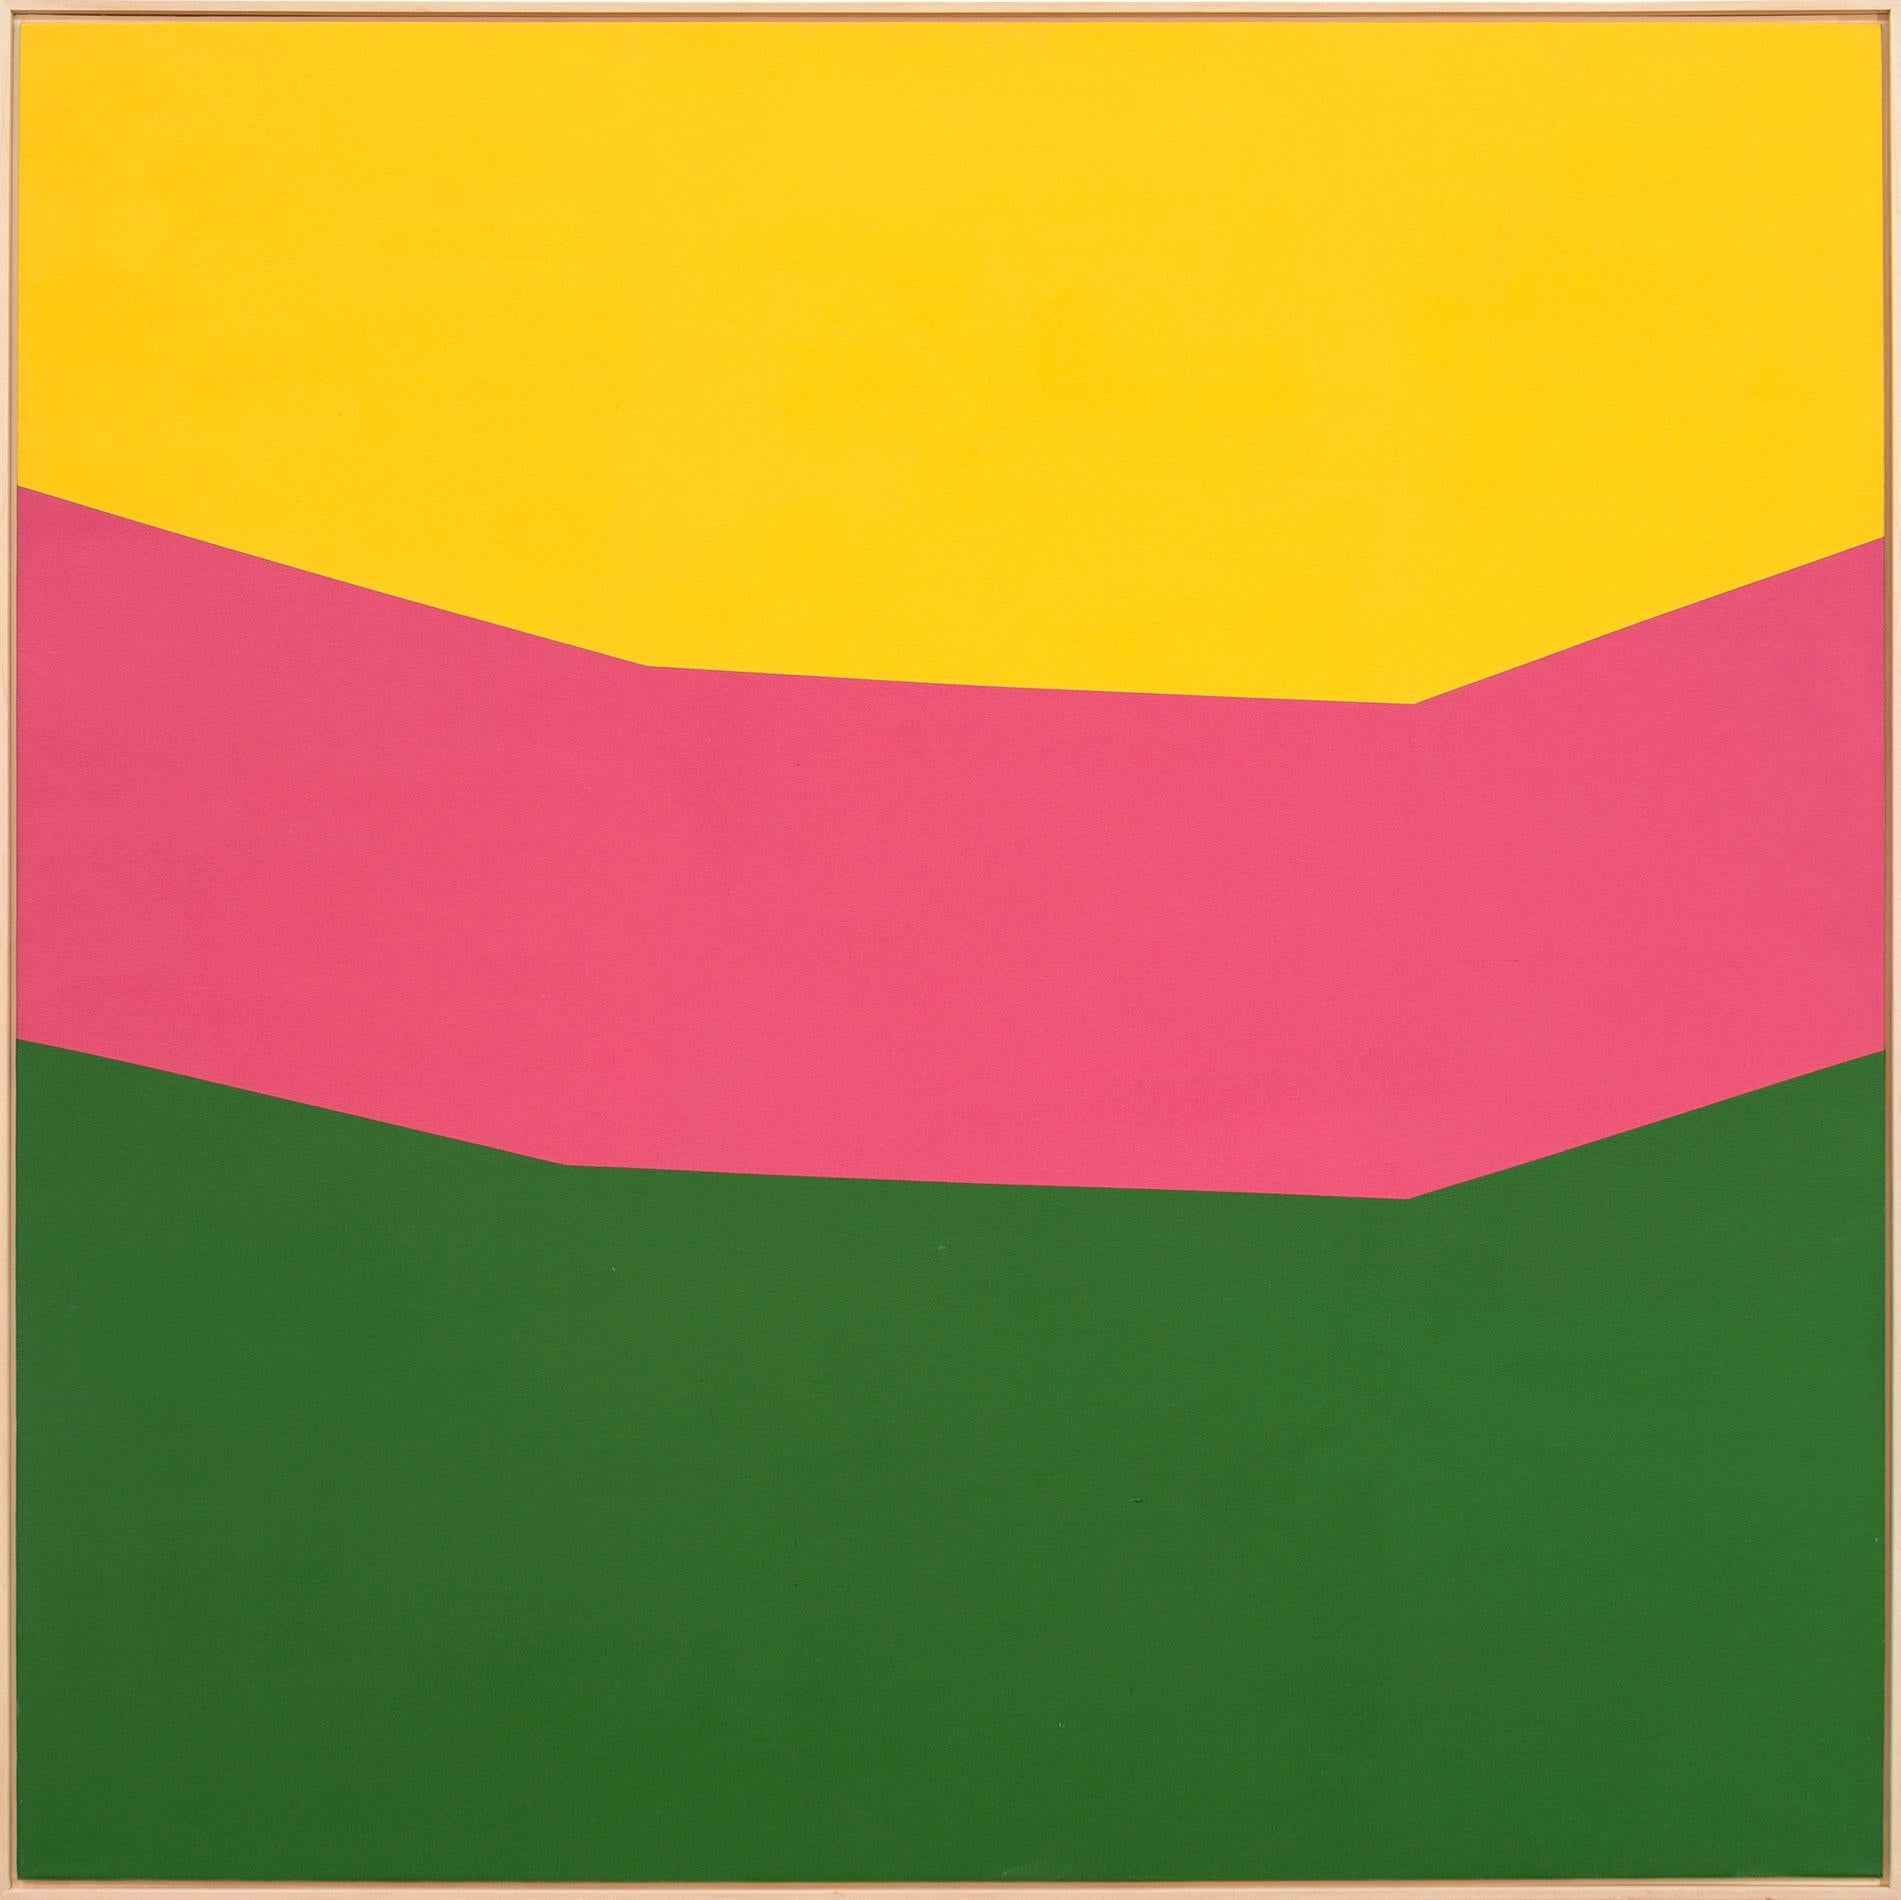 Milly Ristvedt Abstract Painting - Colour Form 18 - large, yellow, green, pink, minimal abstract, acrylic on canvas